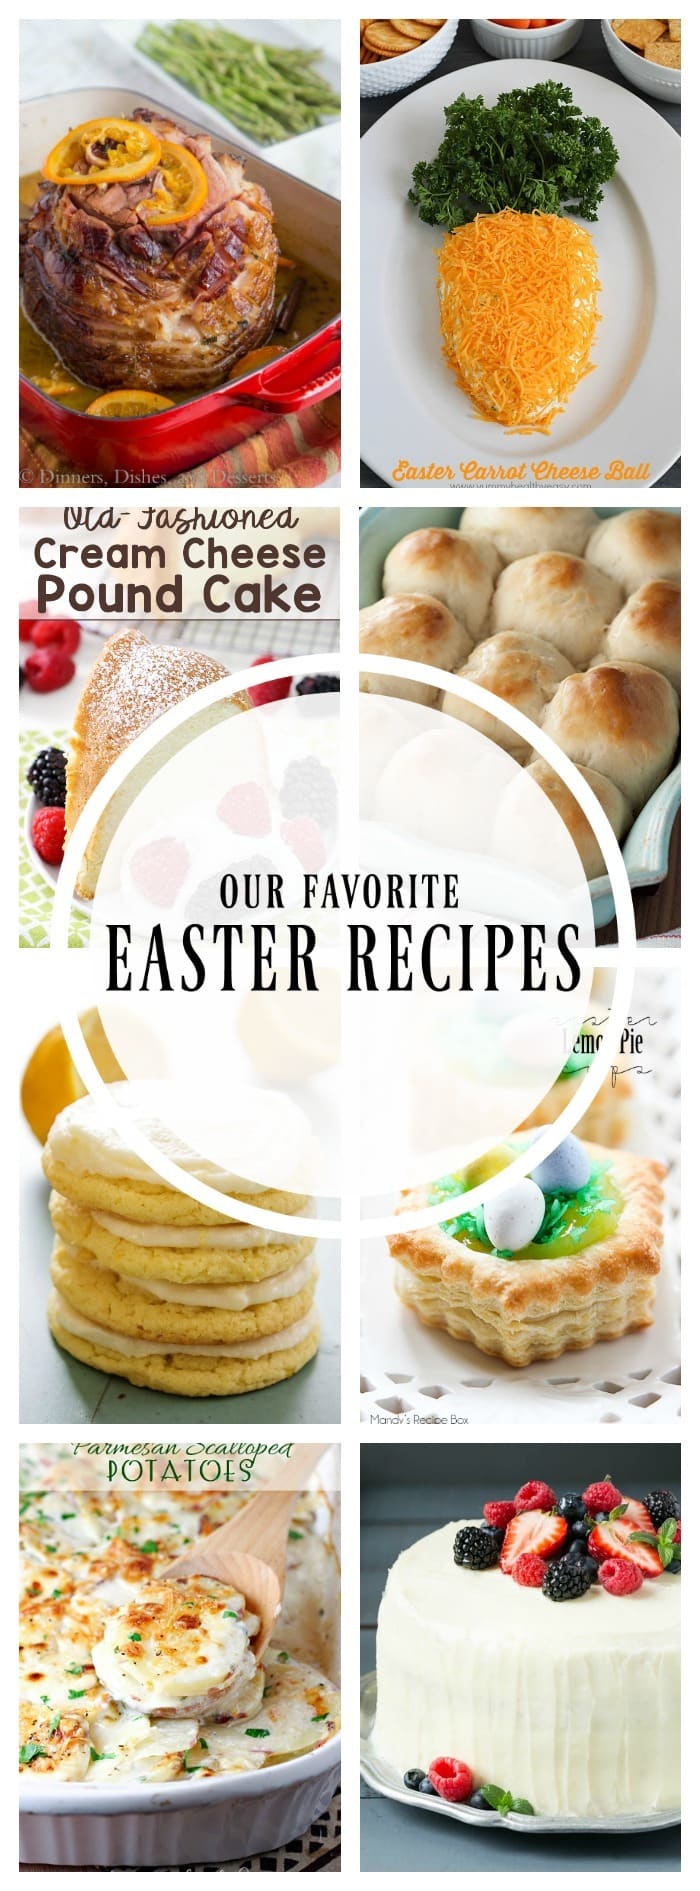 20+ of the Best Easter Recipes all together in one place! From dinner to dessert, I've got you covered with the best ever recipes for Easter! I hope you can find one or ten recipes to try from this awesome roundup including some of my favorite blogger friends! Enjoy!